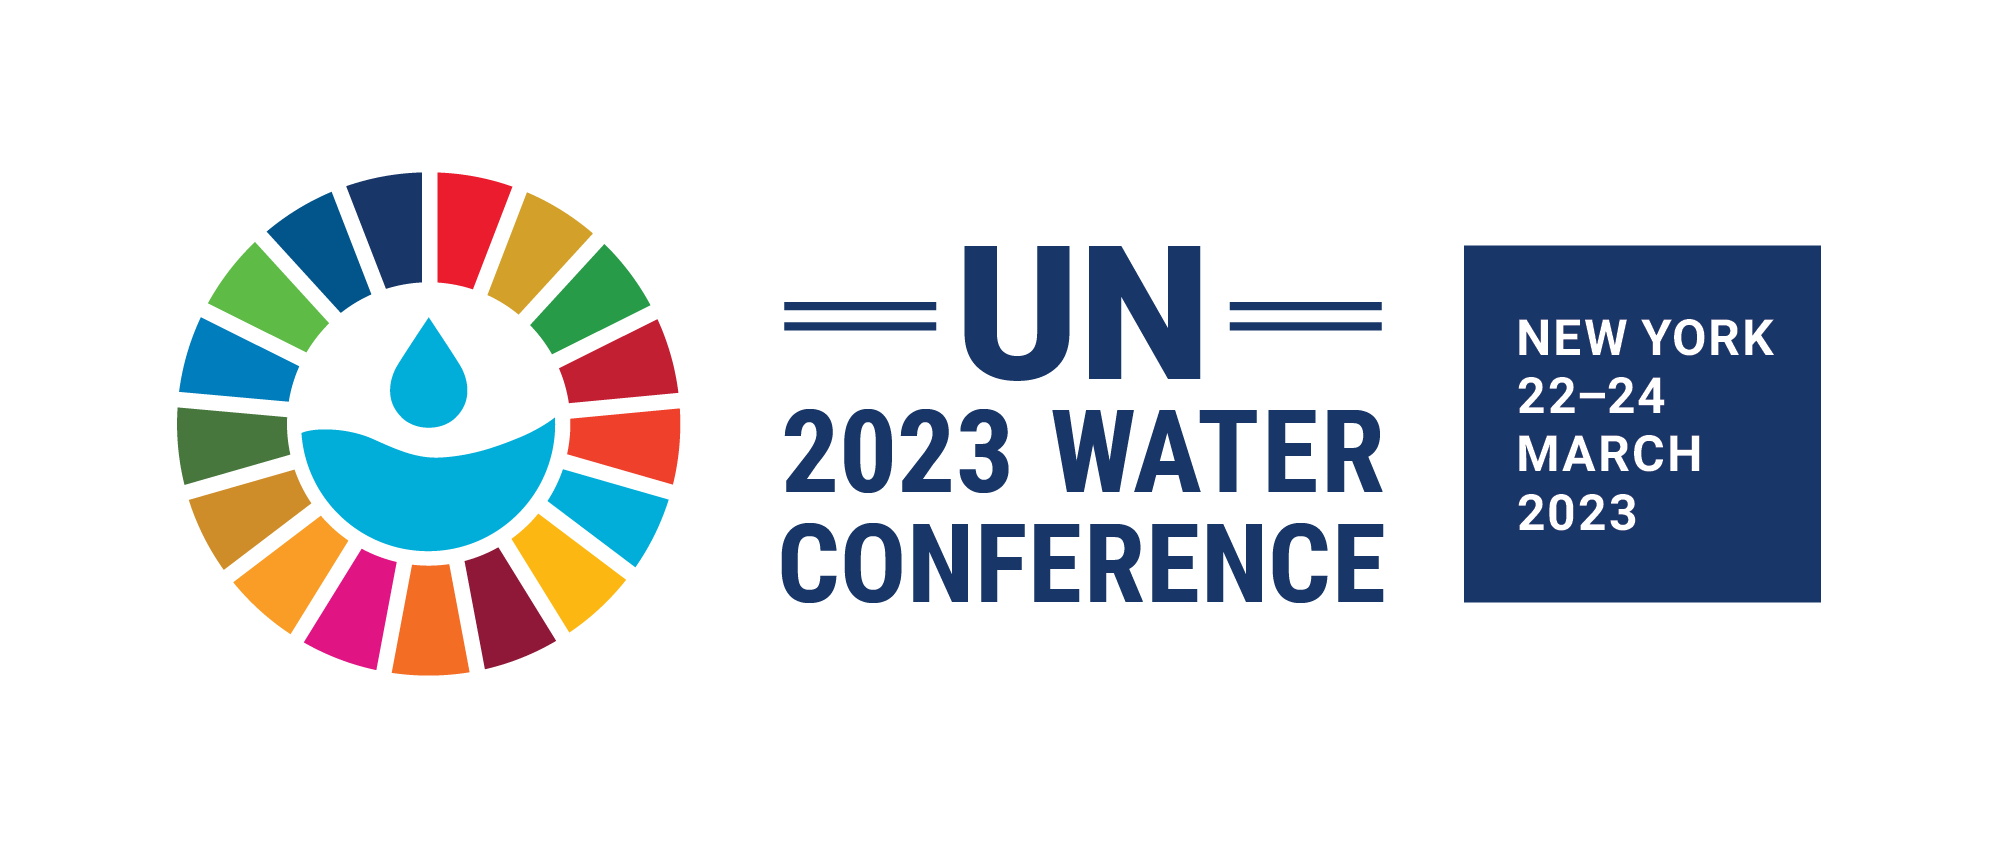 United Nations 2023 Water Conference